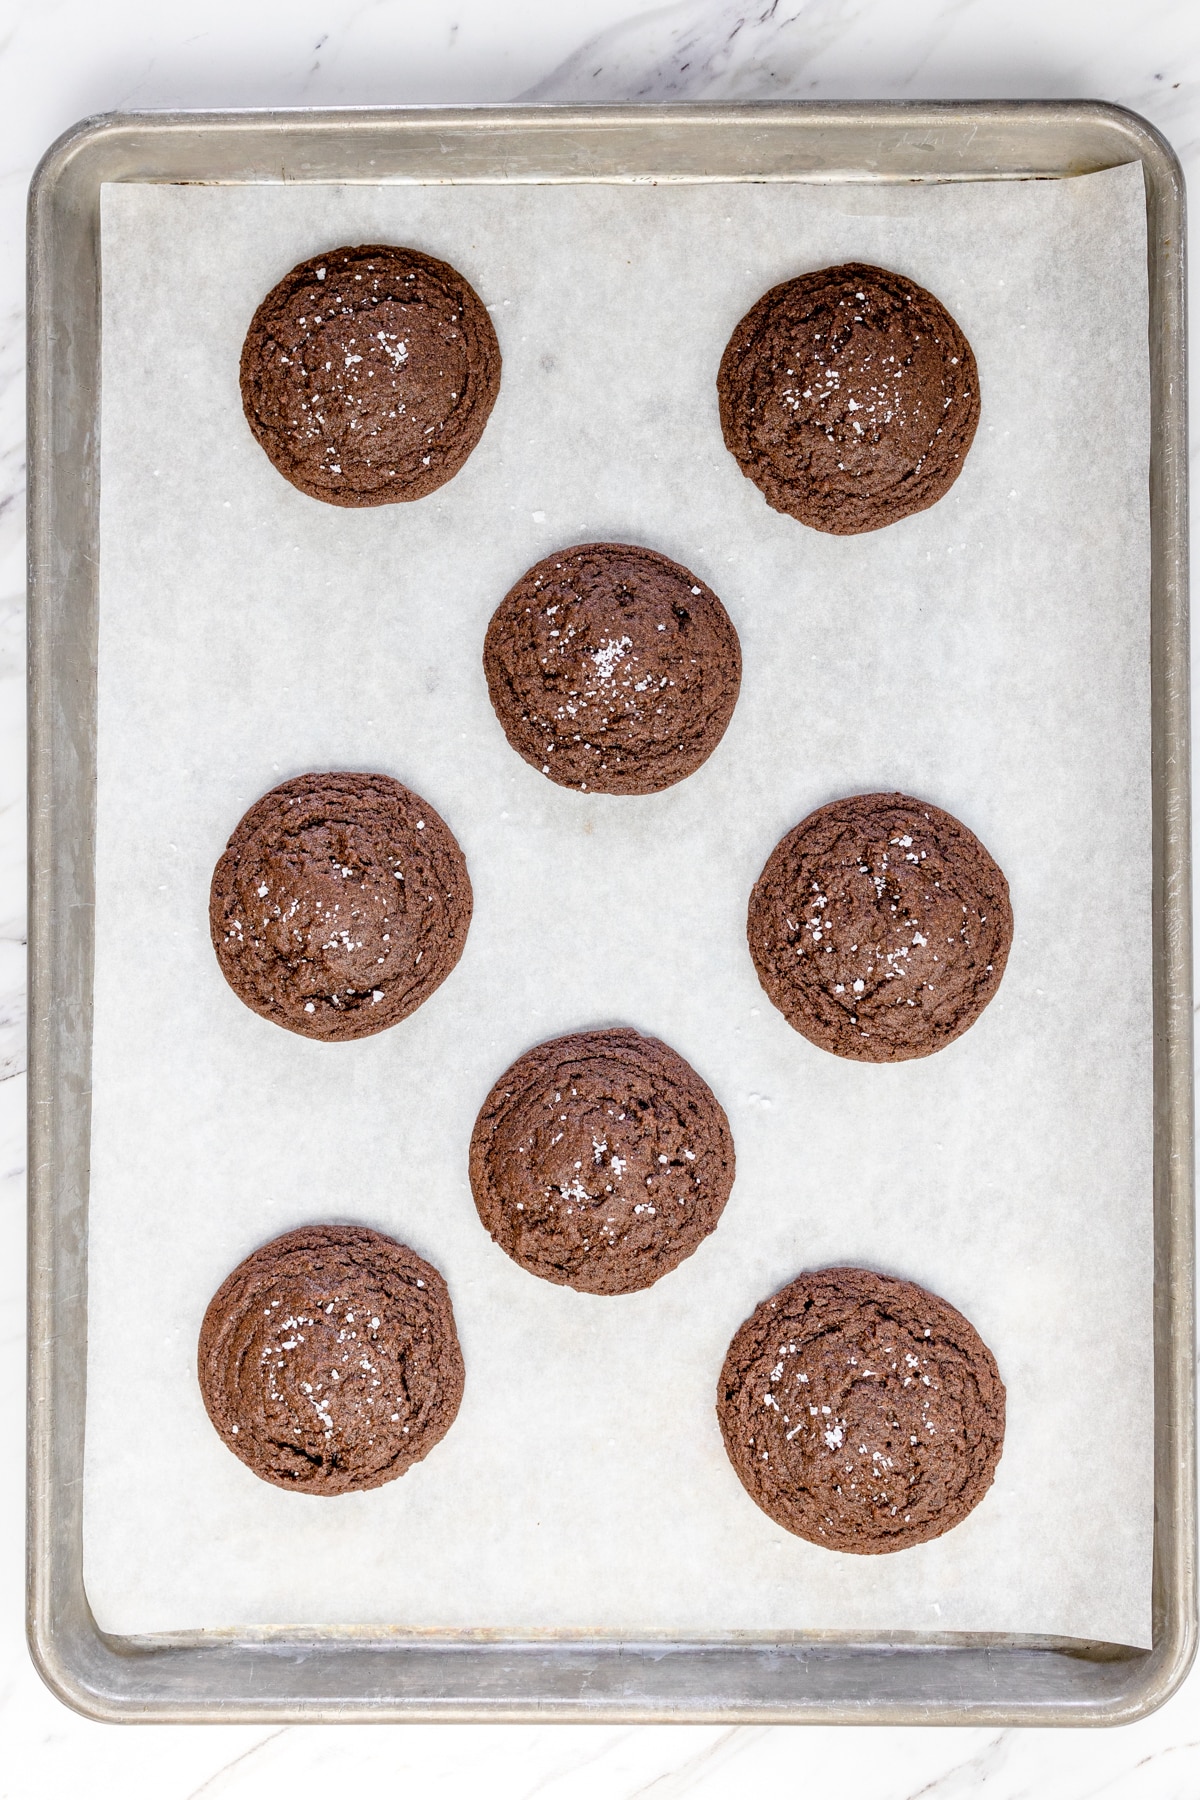 Top view of freshly aked Rolo Cookies on parahcmnet paper on a baking tray.